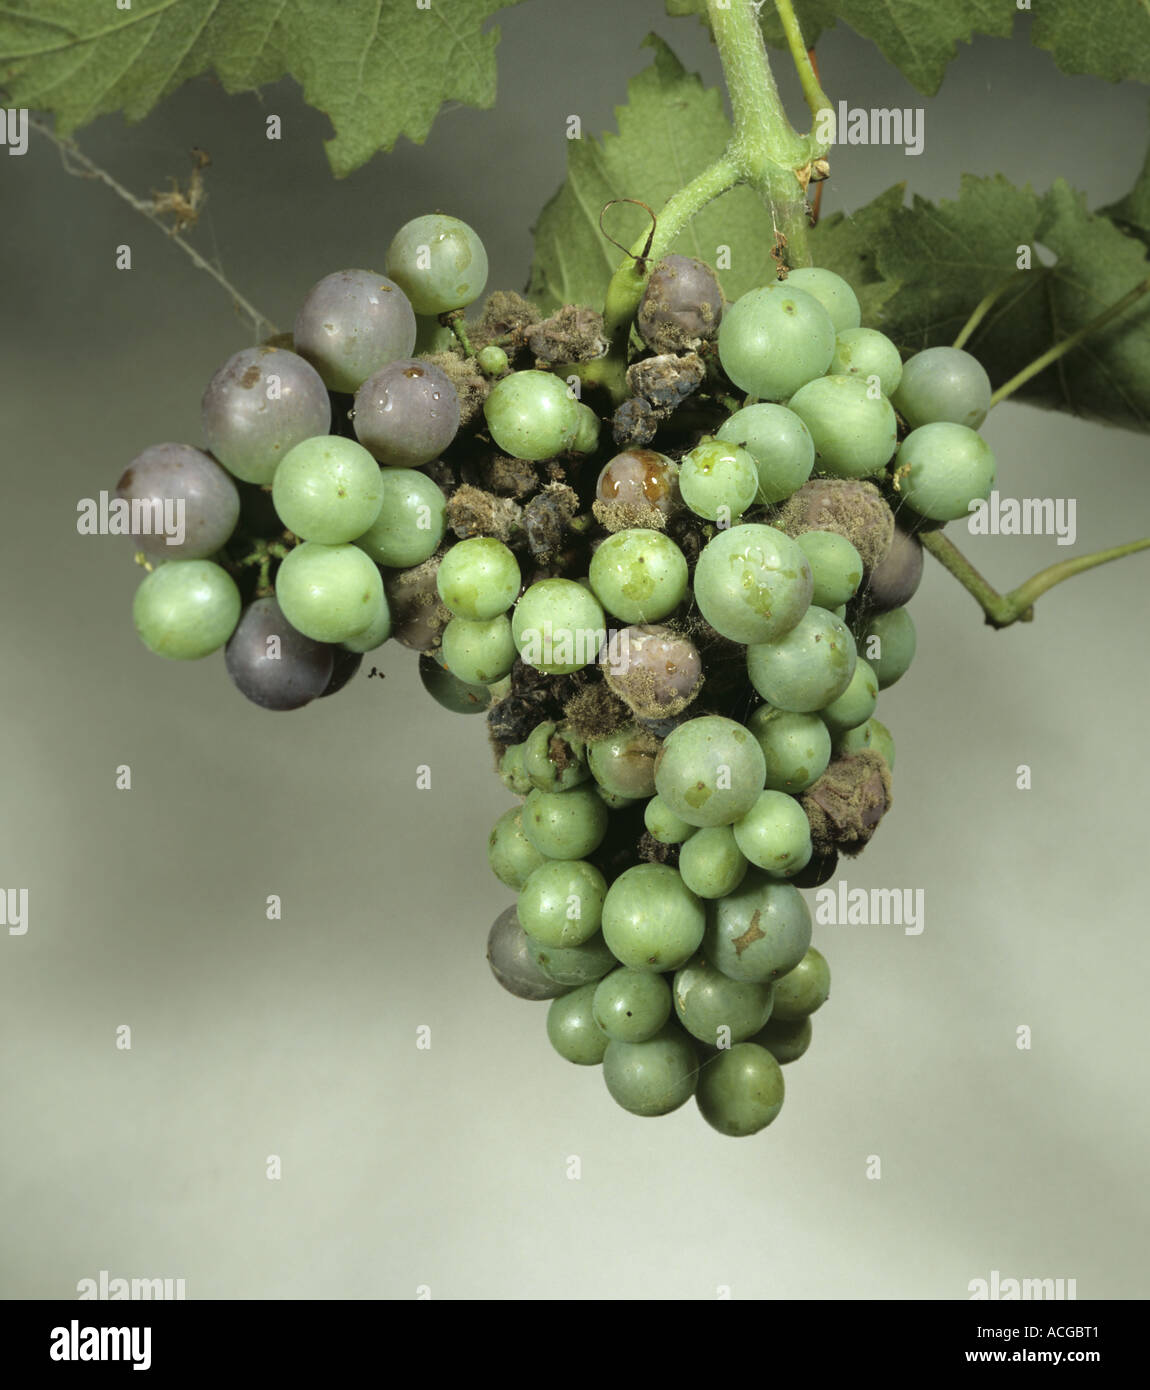 Grey mould Botrytis cinerea on a bunch of white grapes Stock Photo